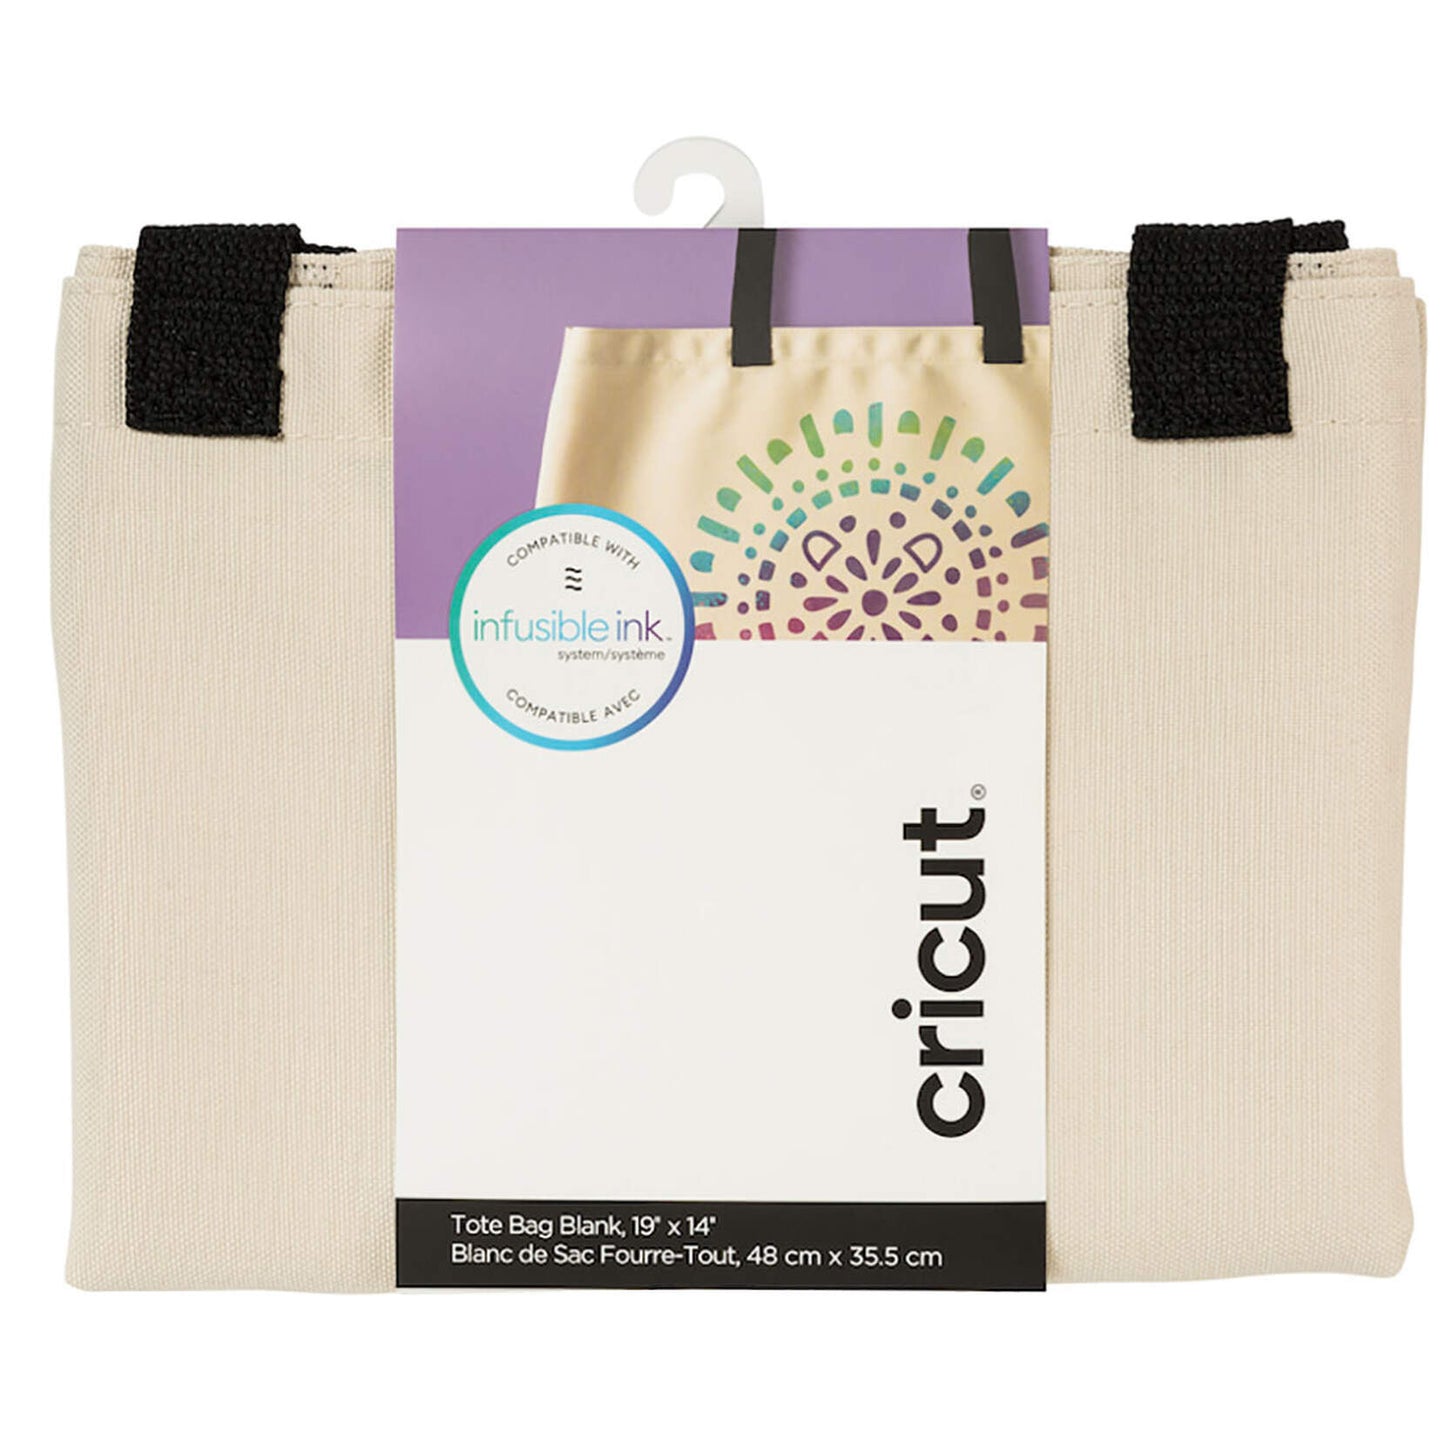 Cricut Infusible Ink Tote Bag (Blank; Large) V&N Goodies Galore